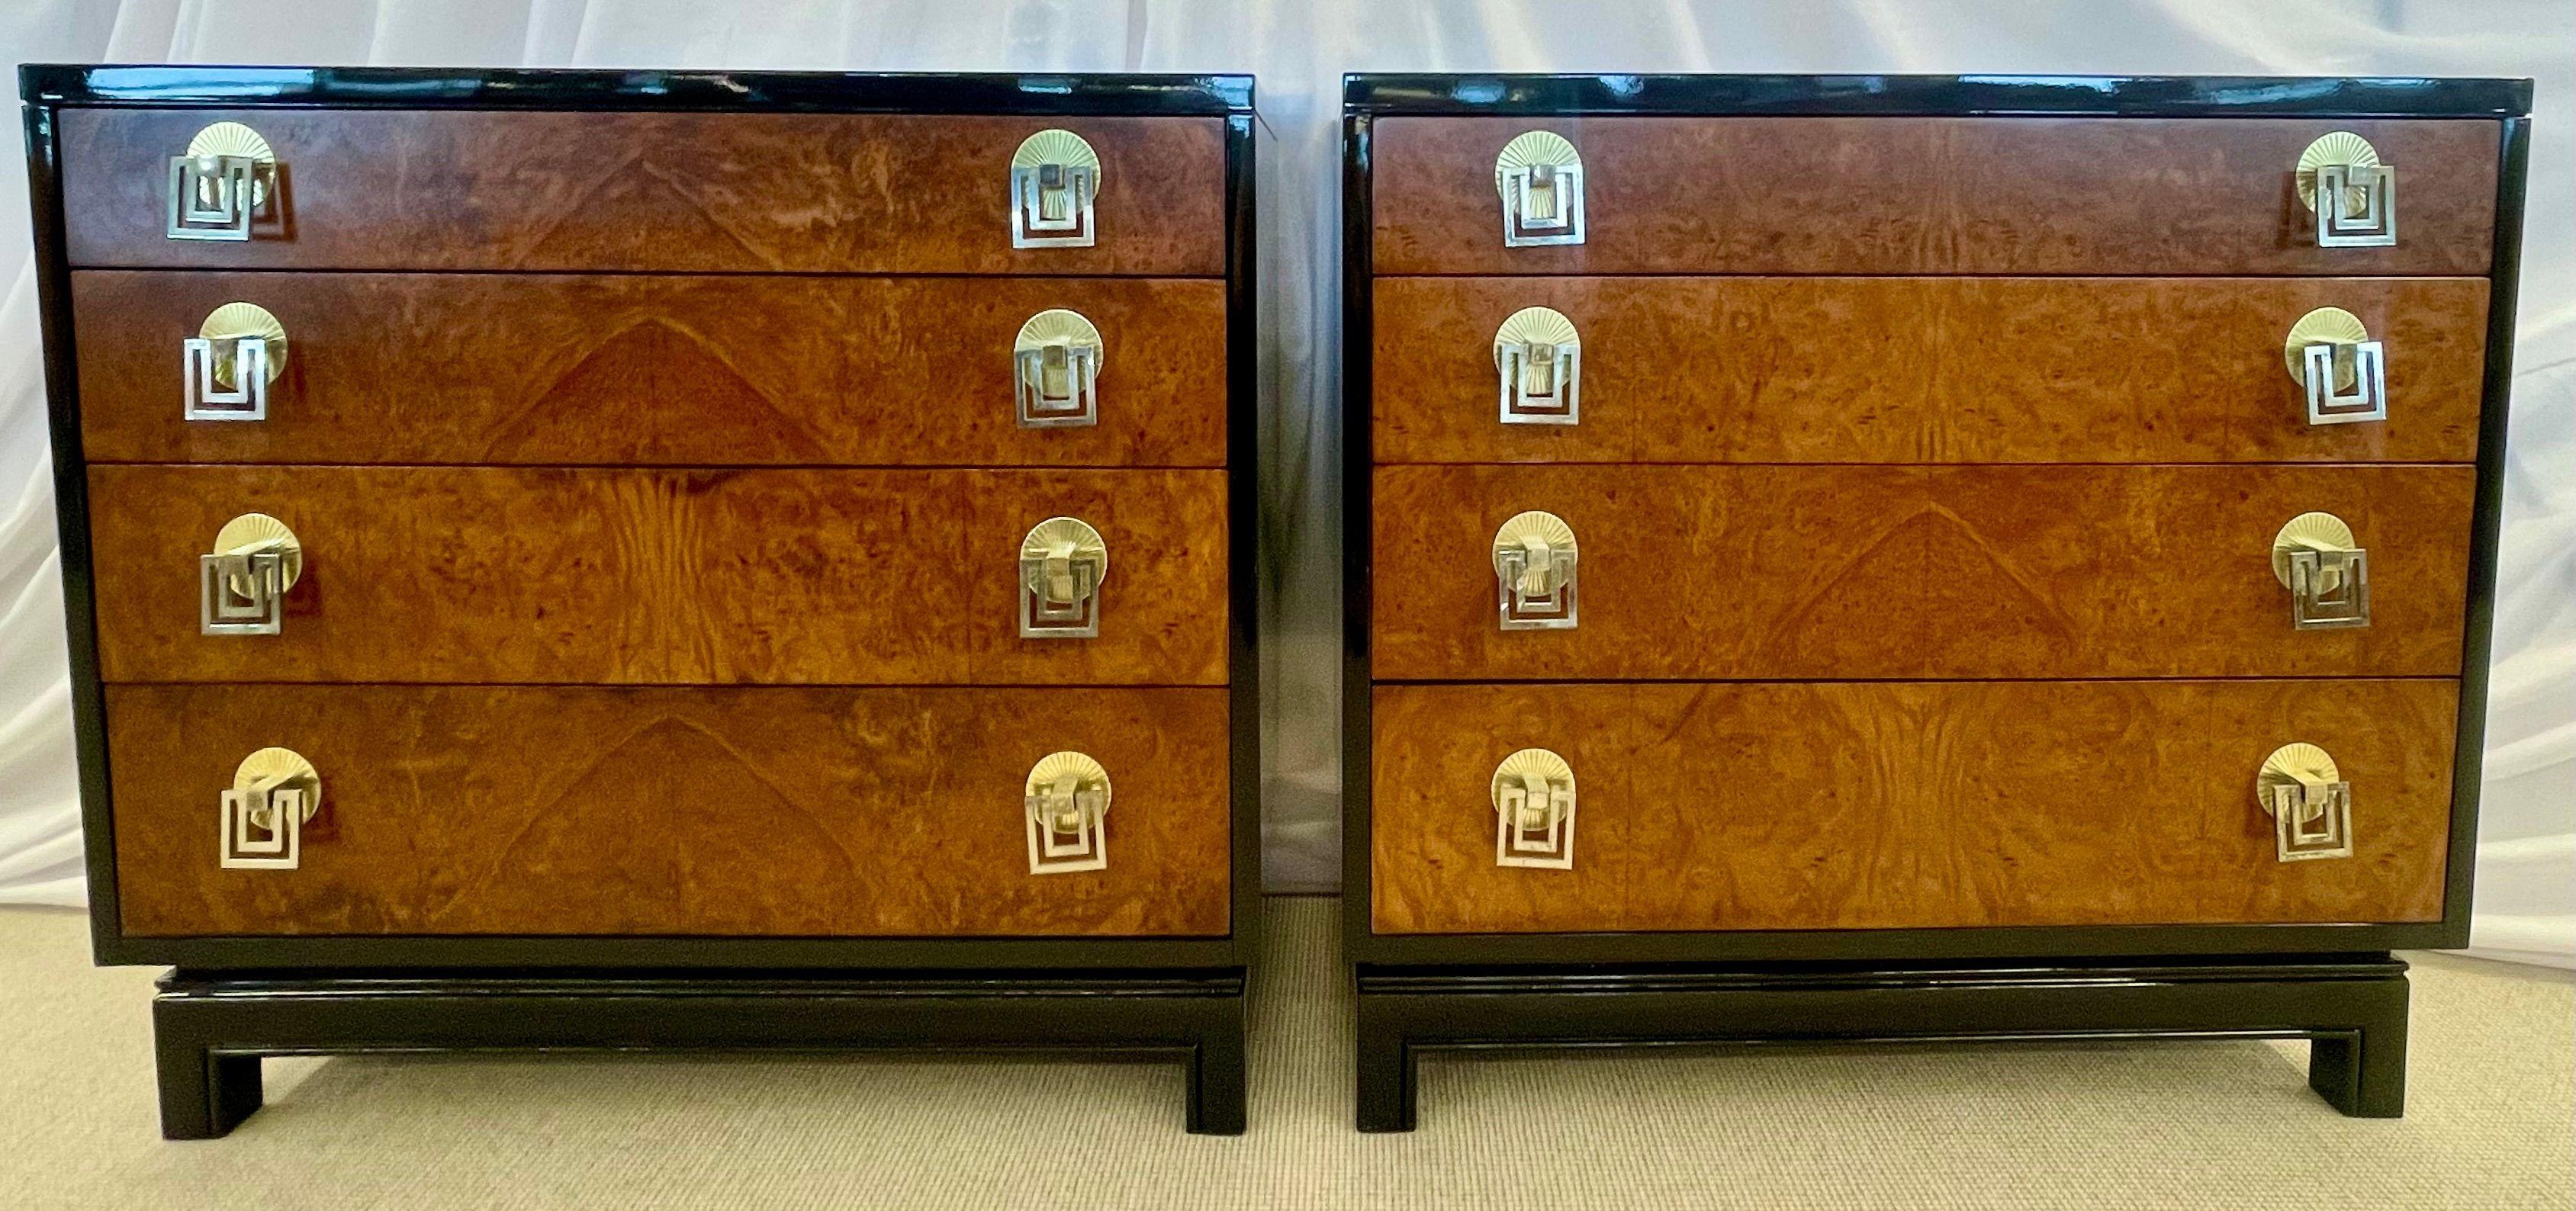 Pair of Mid-Century Modern Commodes, Chests by Renzo Rutili for John Stuart, Fully Refinished. An absolutely stunning pair of bedside cabinets or chests having Birdseye Maple drawer fronts with Art Deco Gilt Drawer Pulls. The drawers are graduating